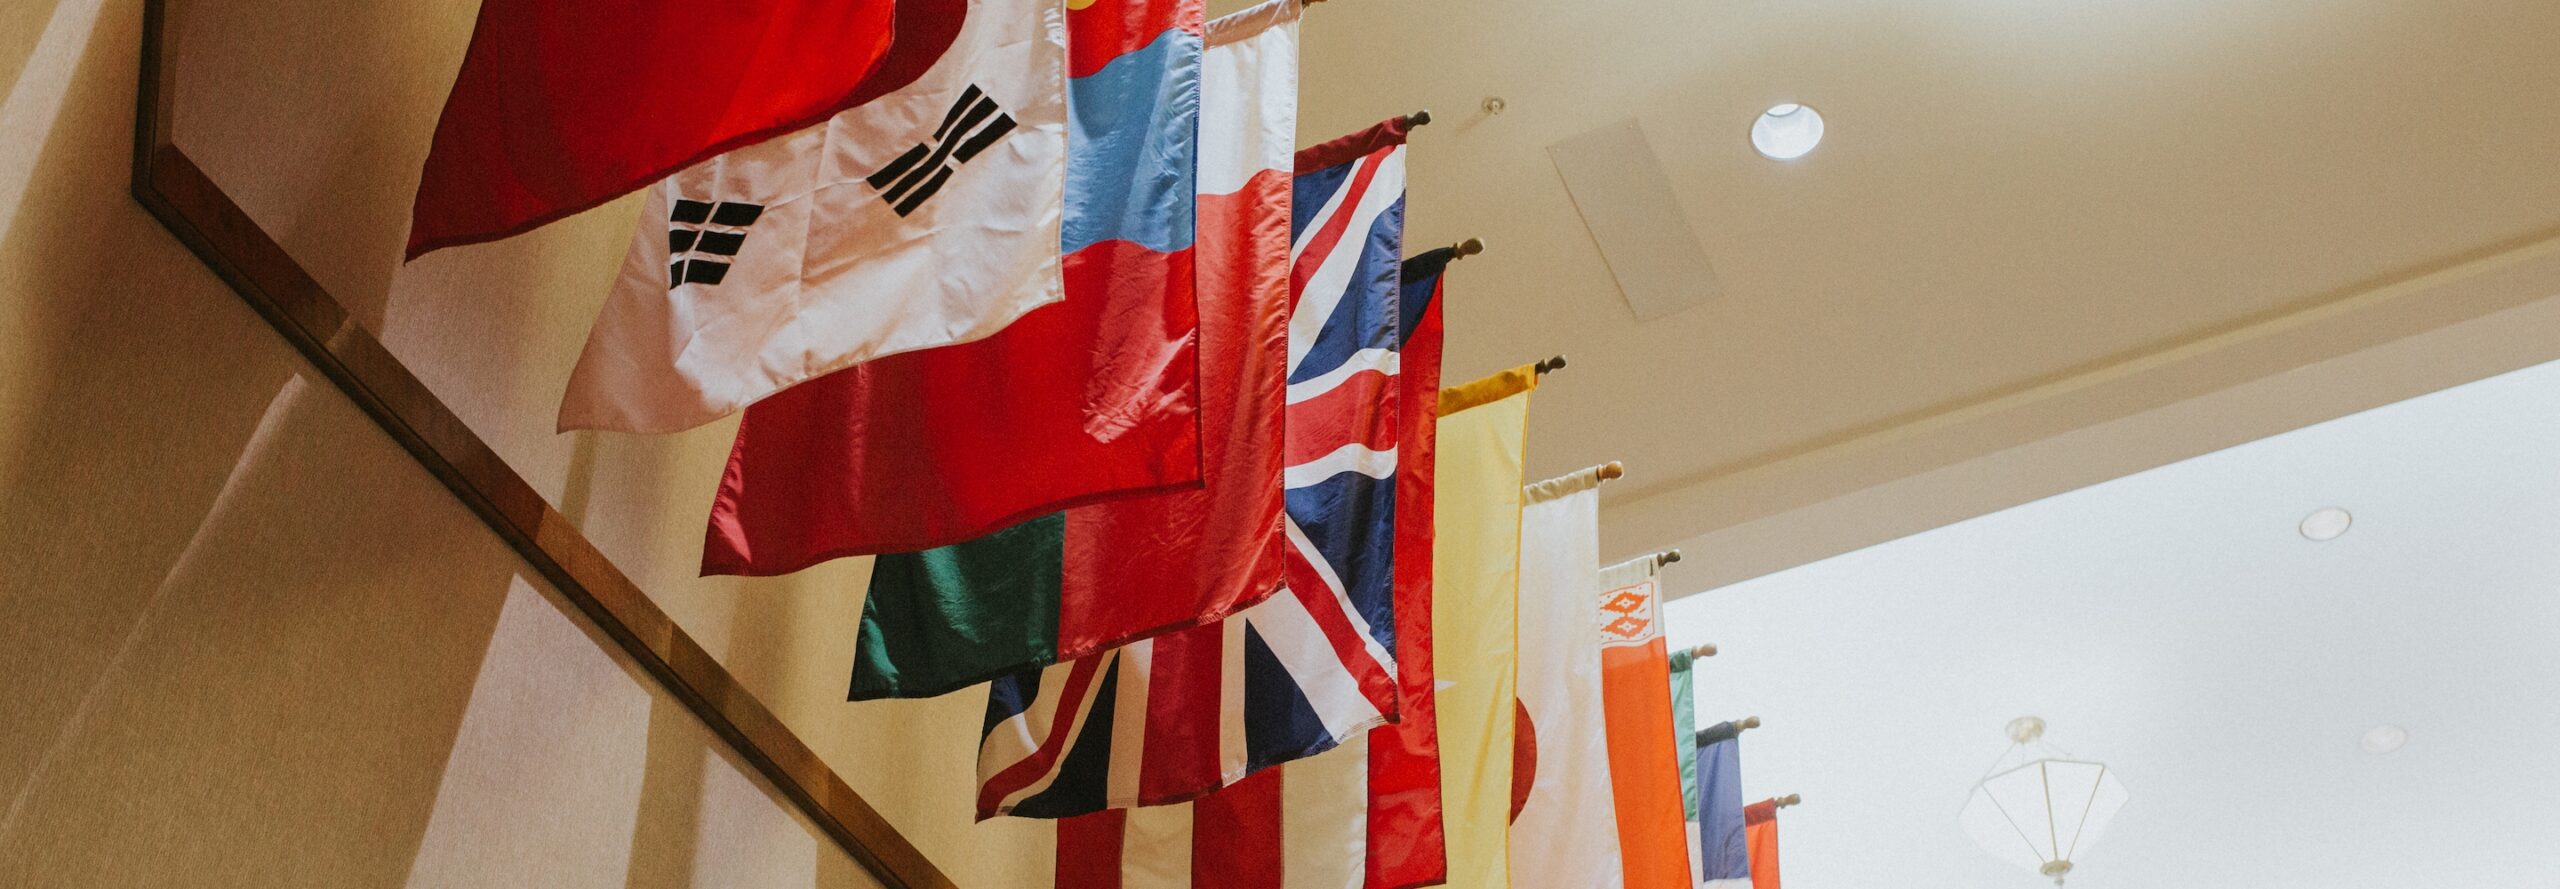 flags of the nations hanging in an academic building